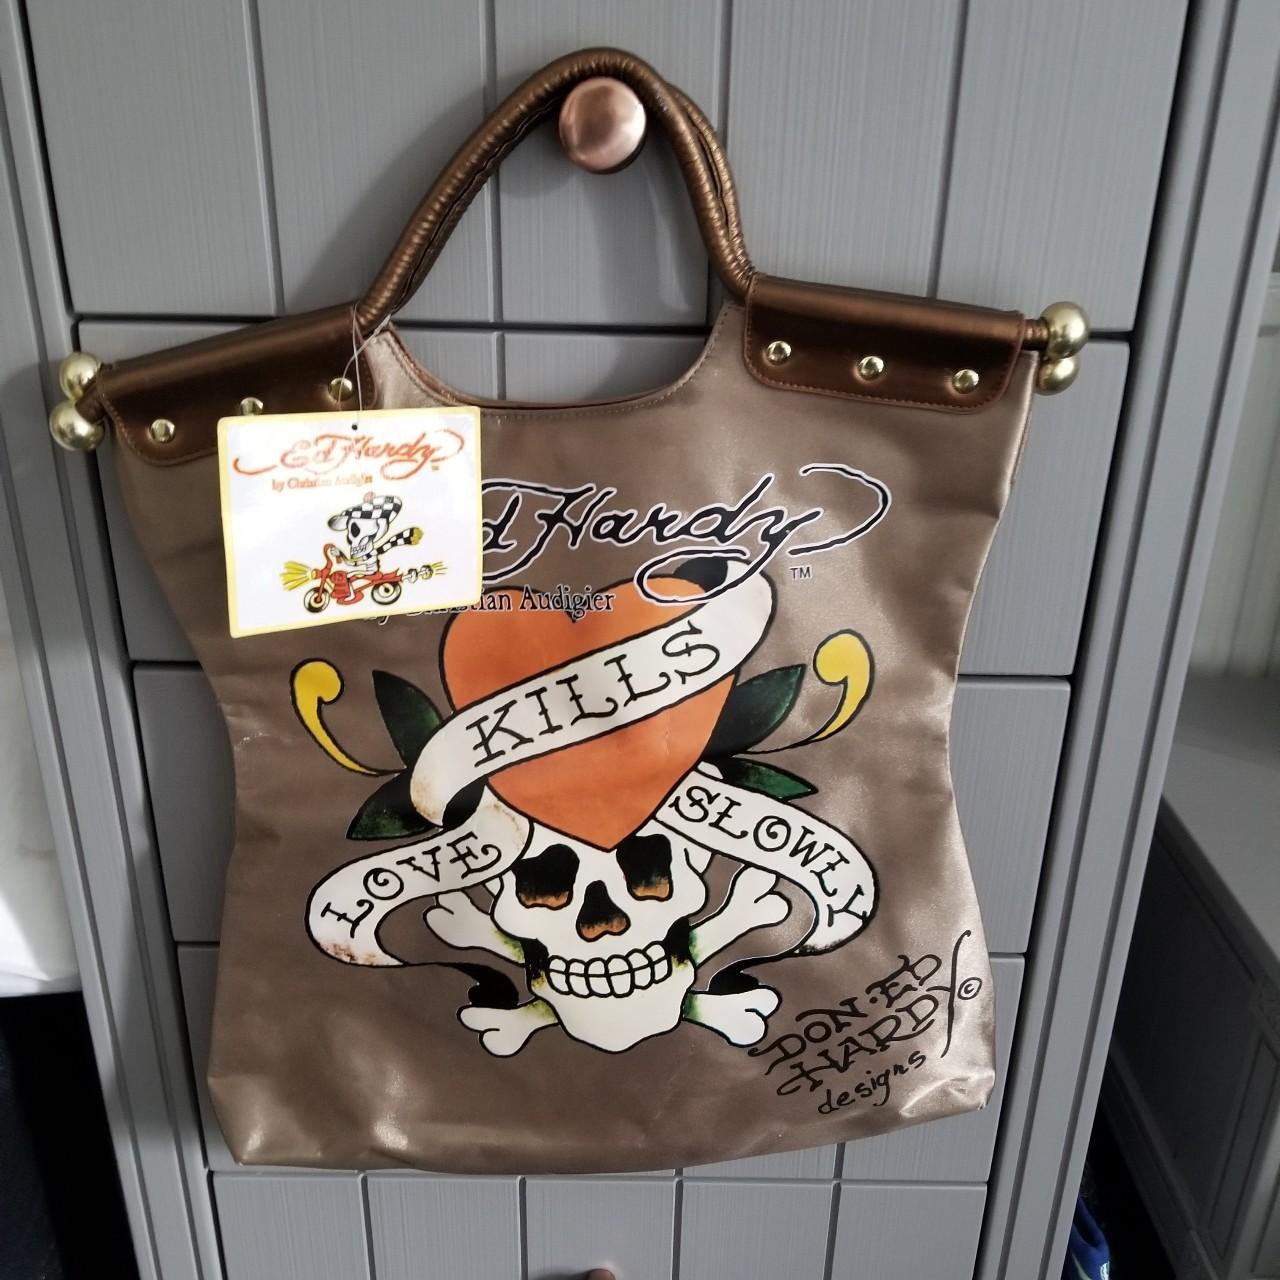 Vintage Real Ed Hardy Purse for Sale in Levelland, TX - OfferUp